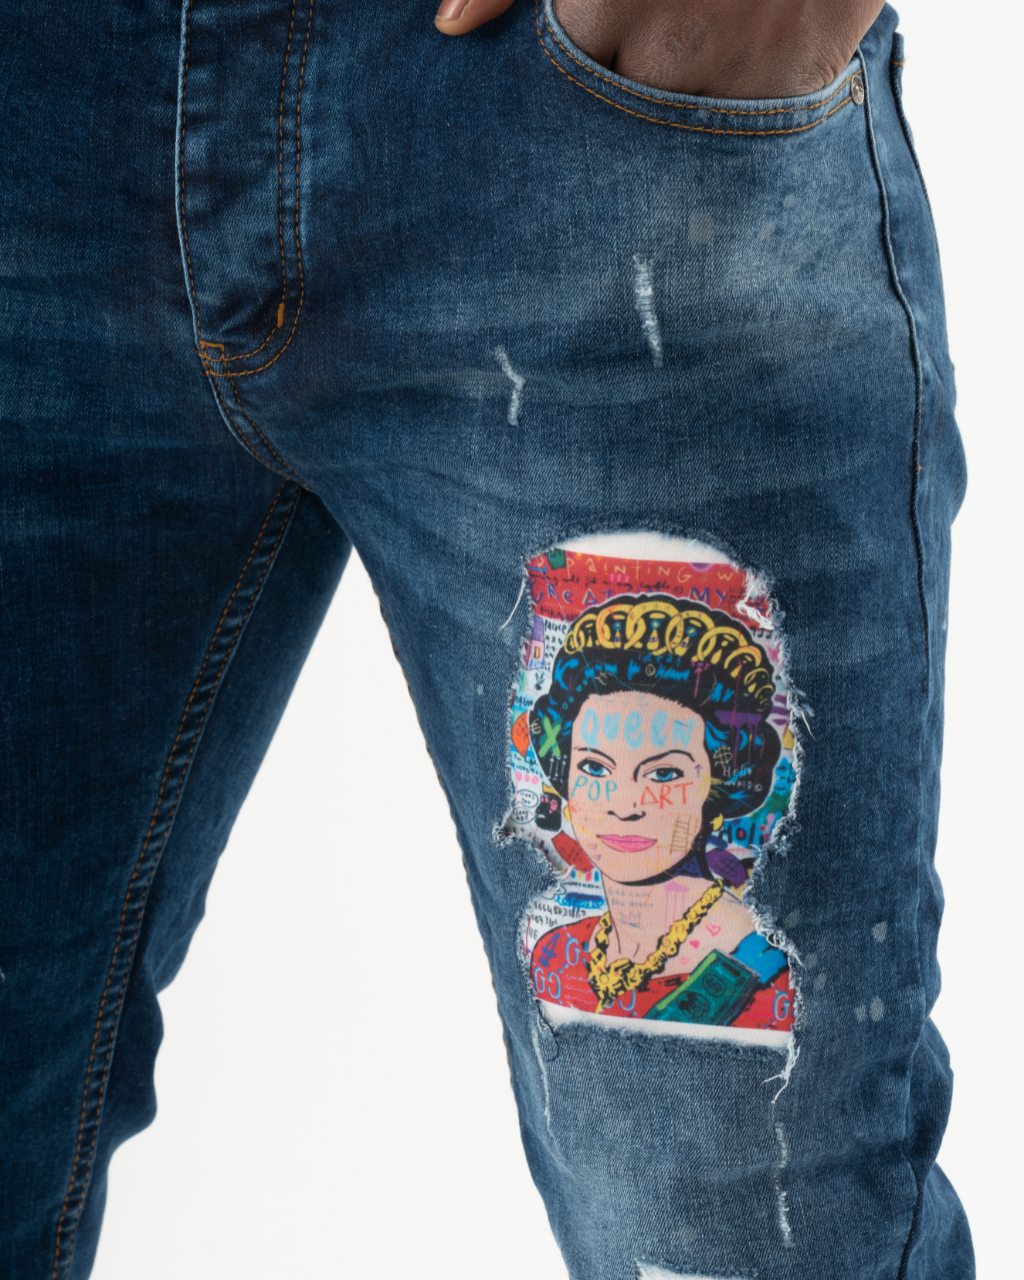 A pair of CRESCENDO jeans featuring an image of Queen Elizabeth.